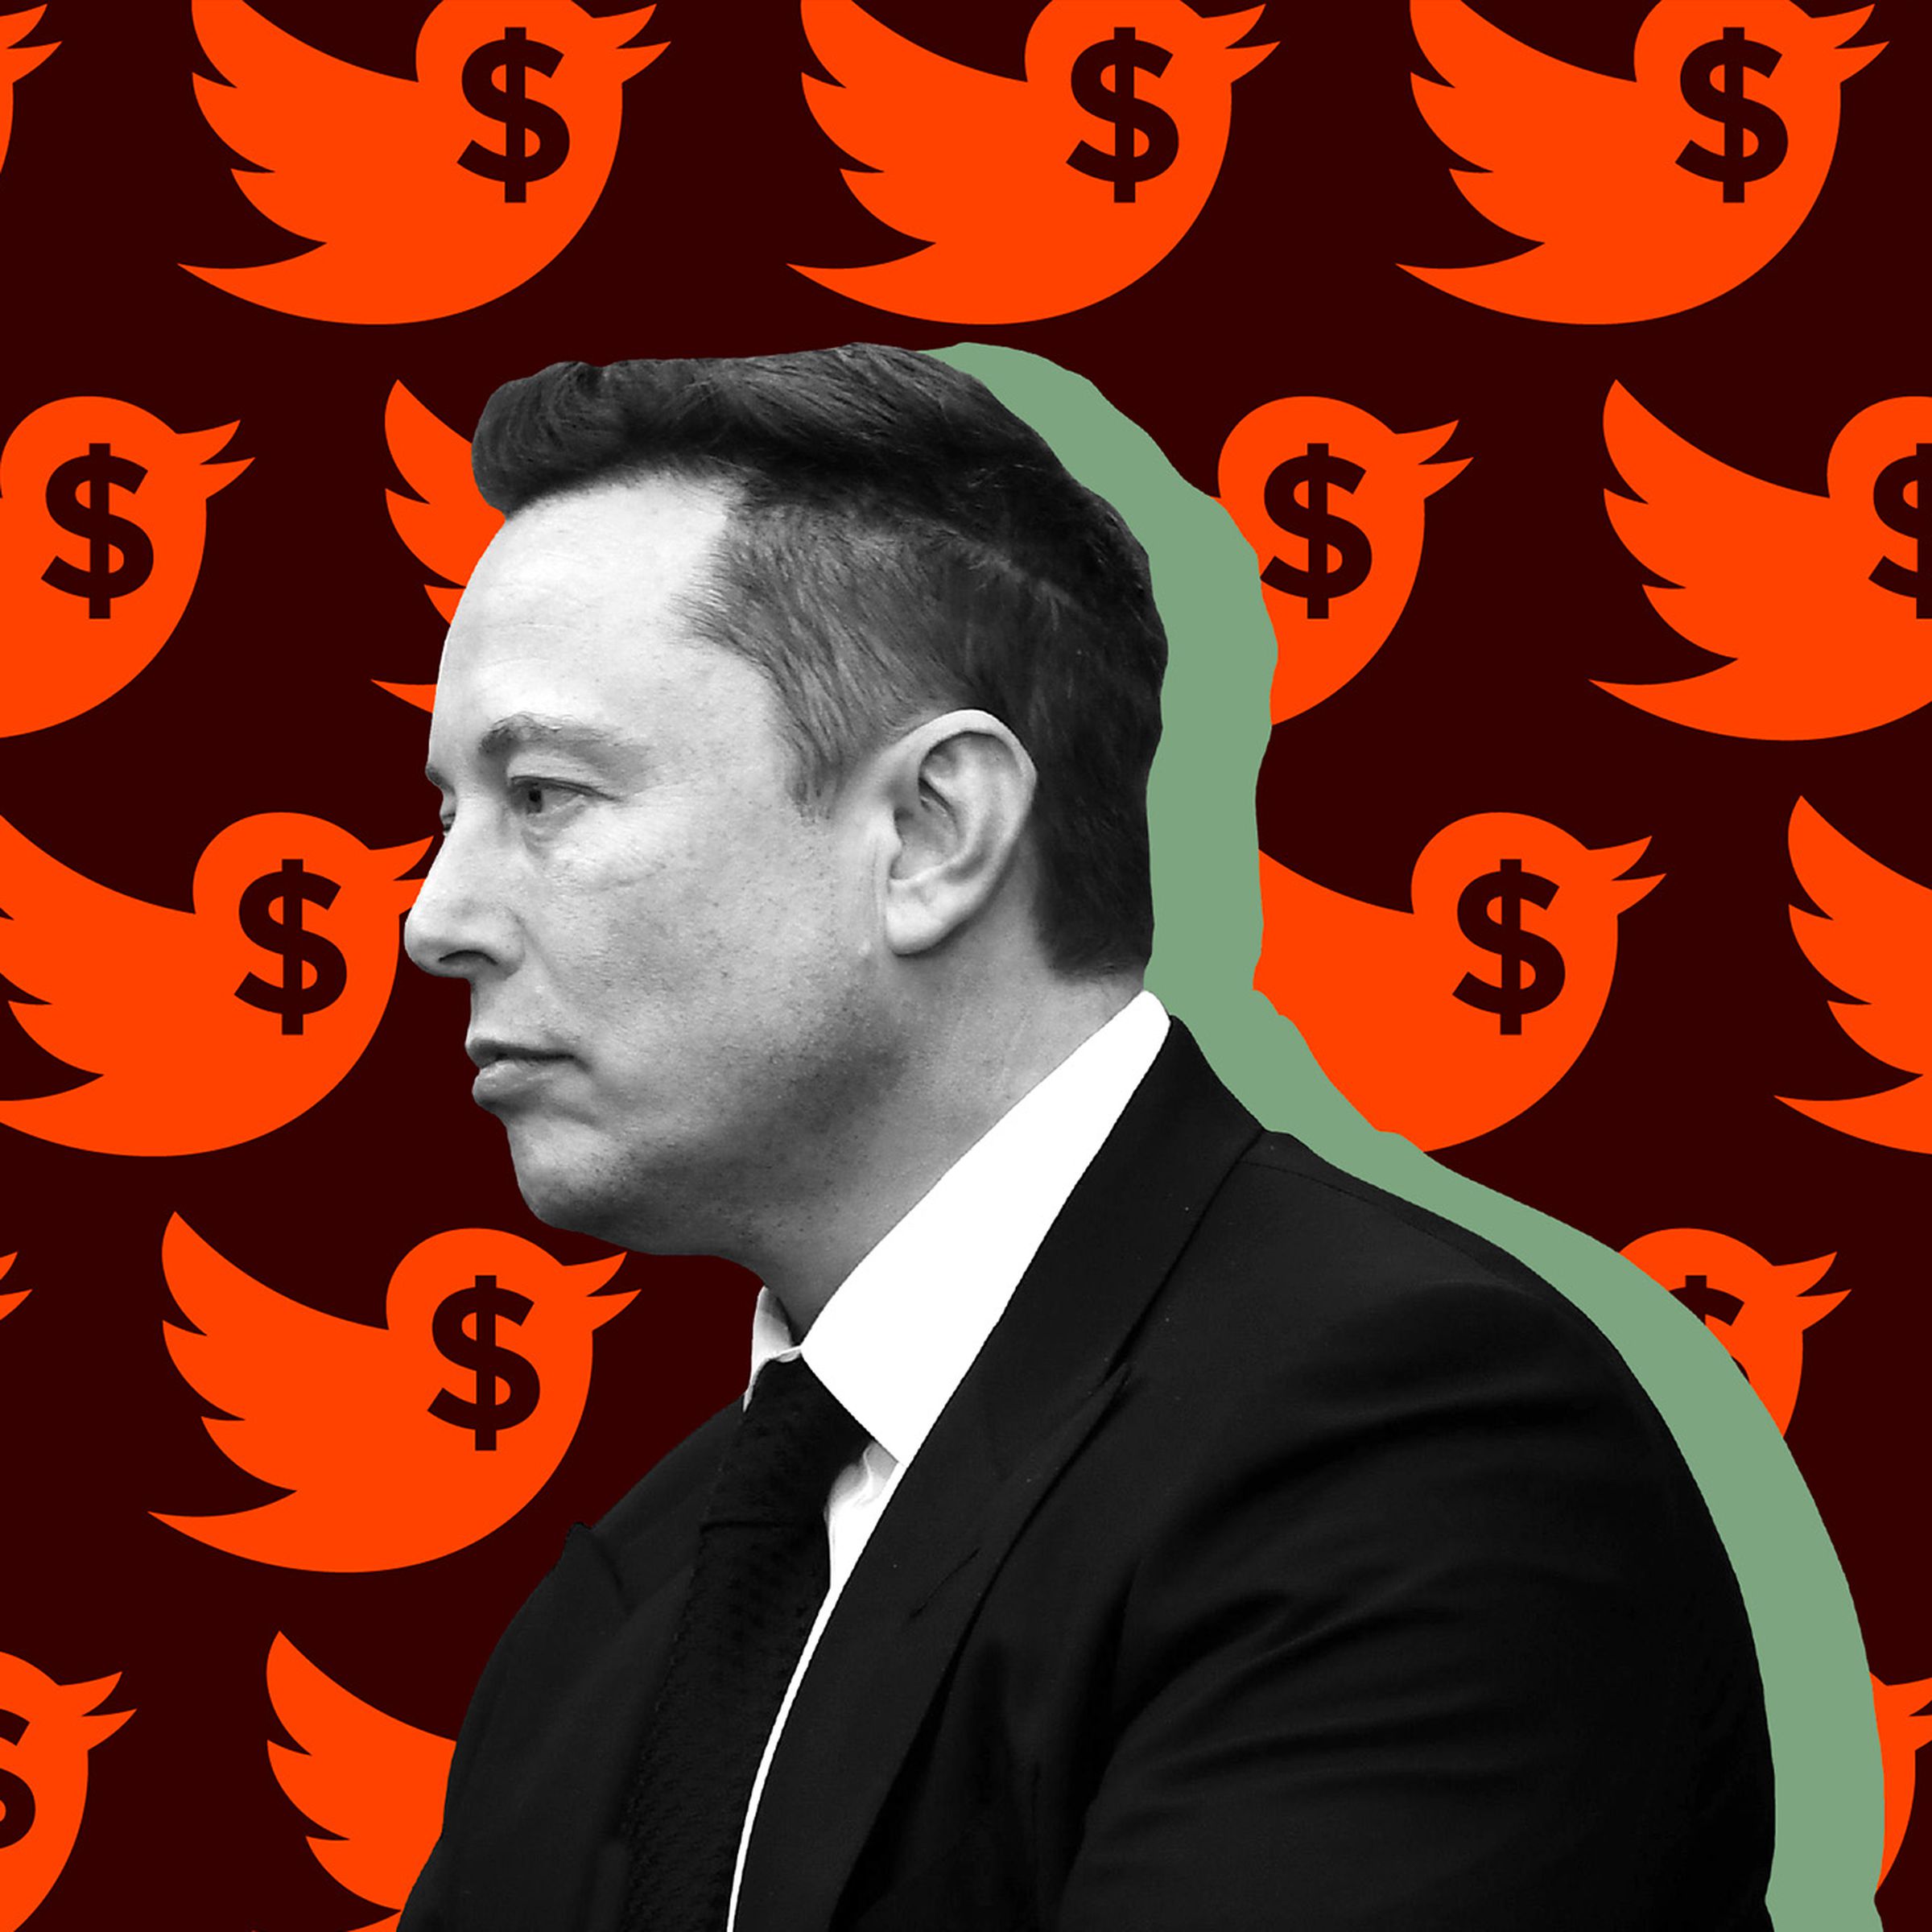 Illustration showing Elon Musk in profile, in front of Twitter logos with a dollar sign inserted in place of the bird’s eye.